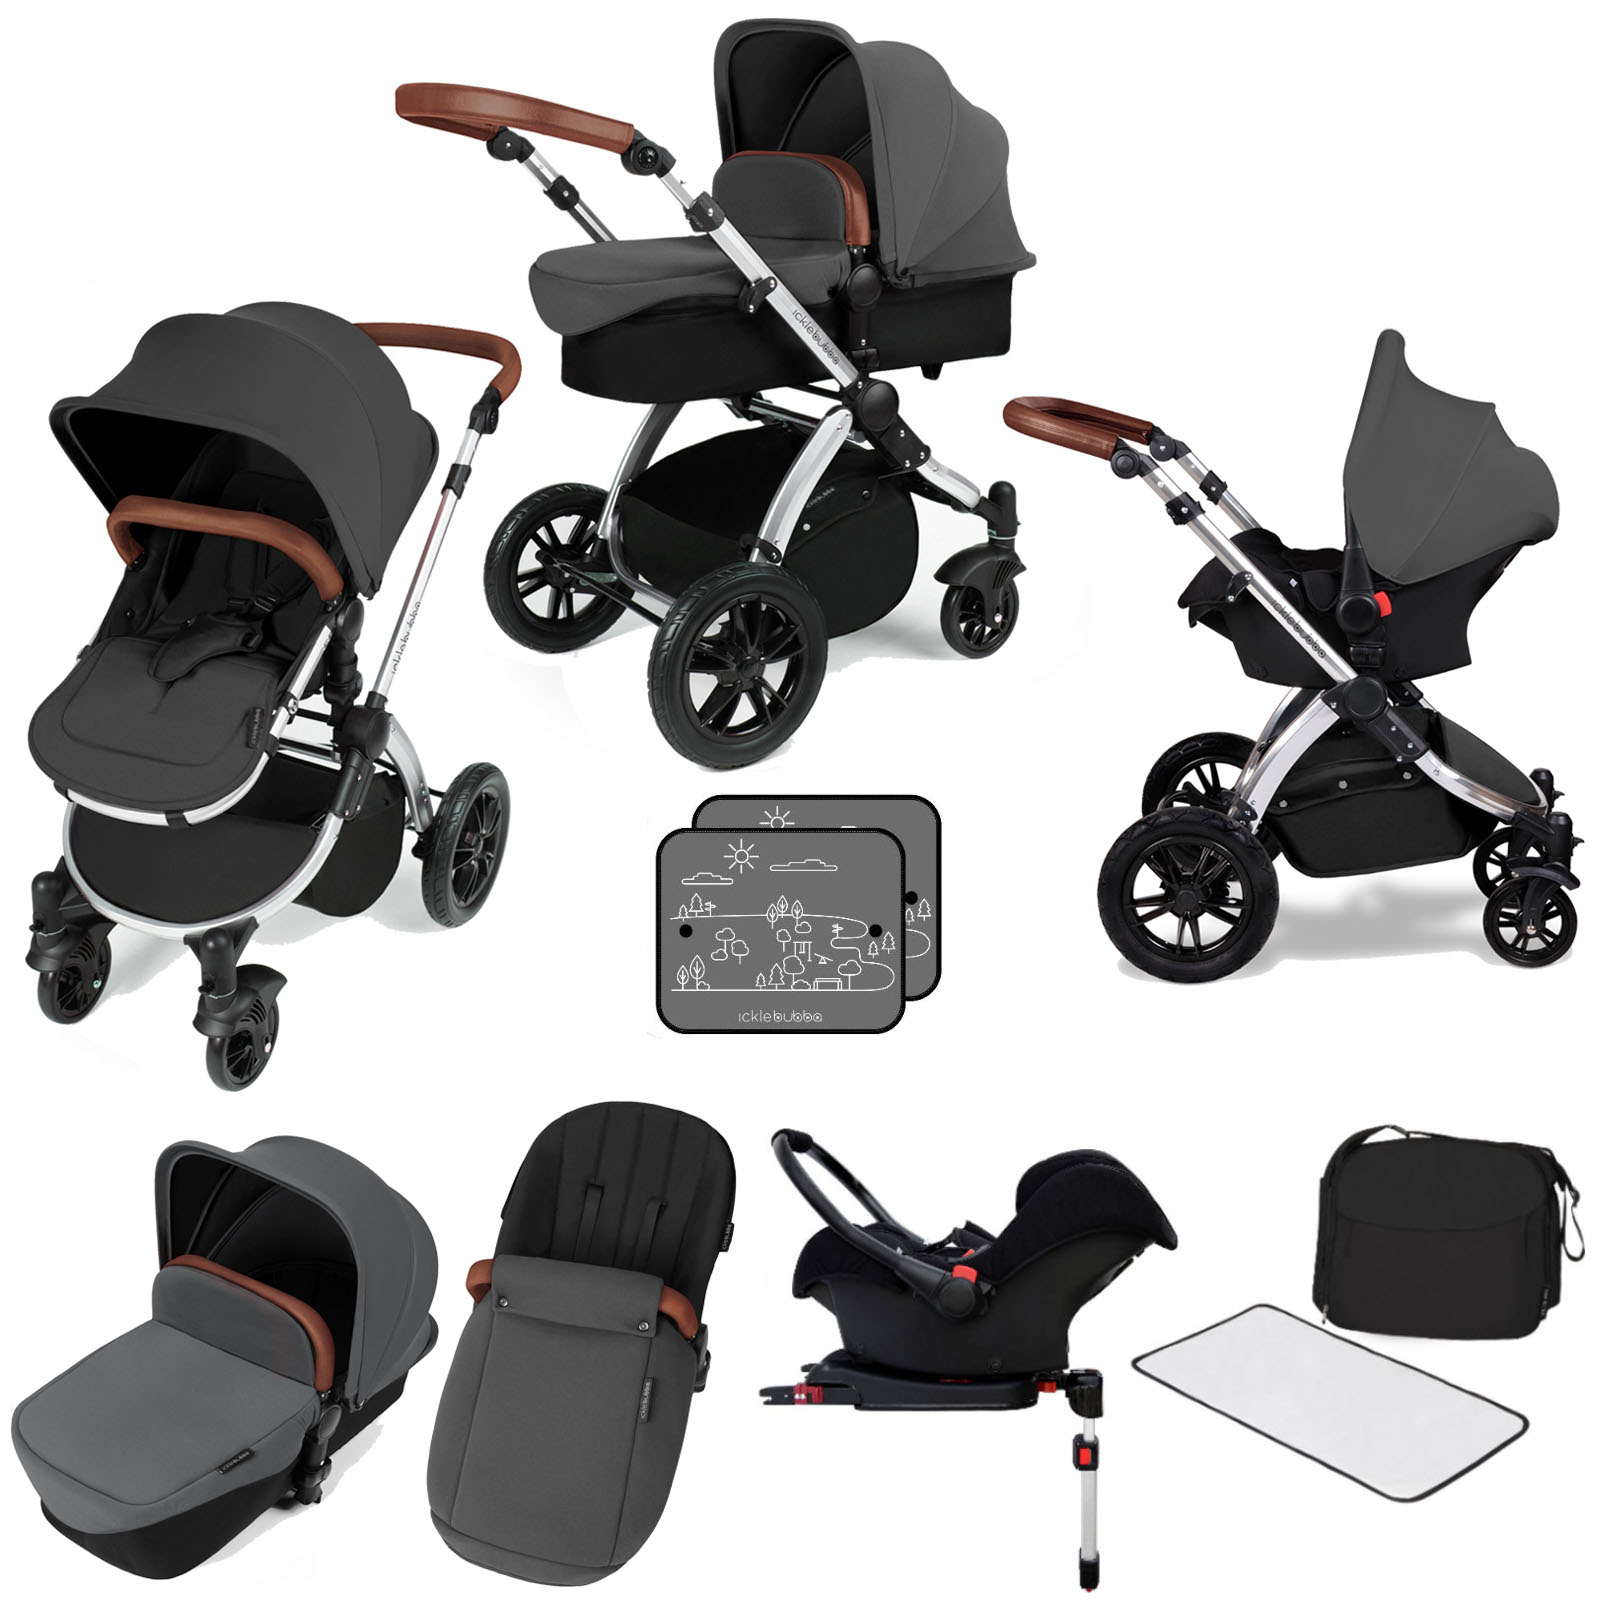 Ickle bubba Stomp V3 Silver All In One Travel System & ISOFIX Base Bundle - Graphite Grey